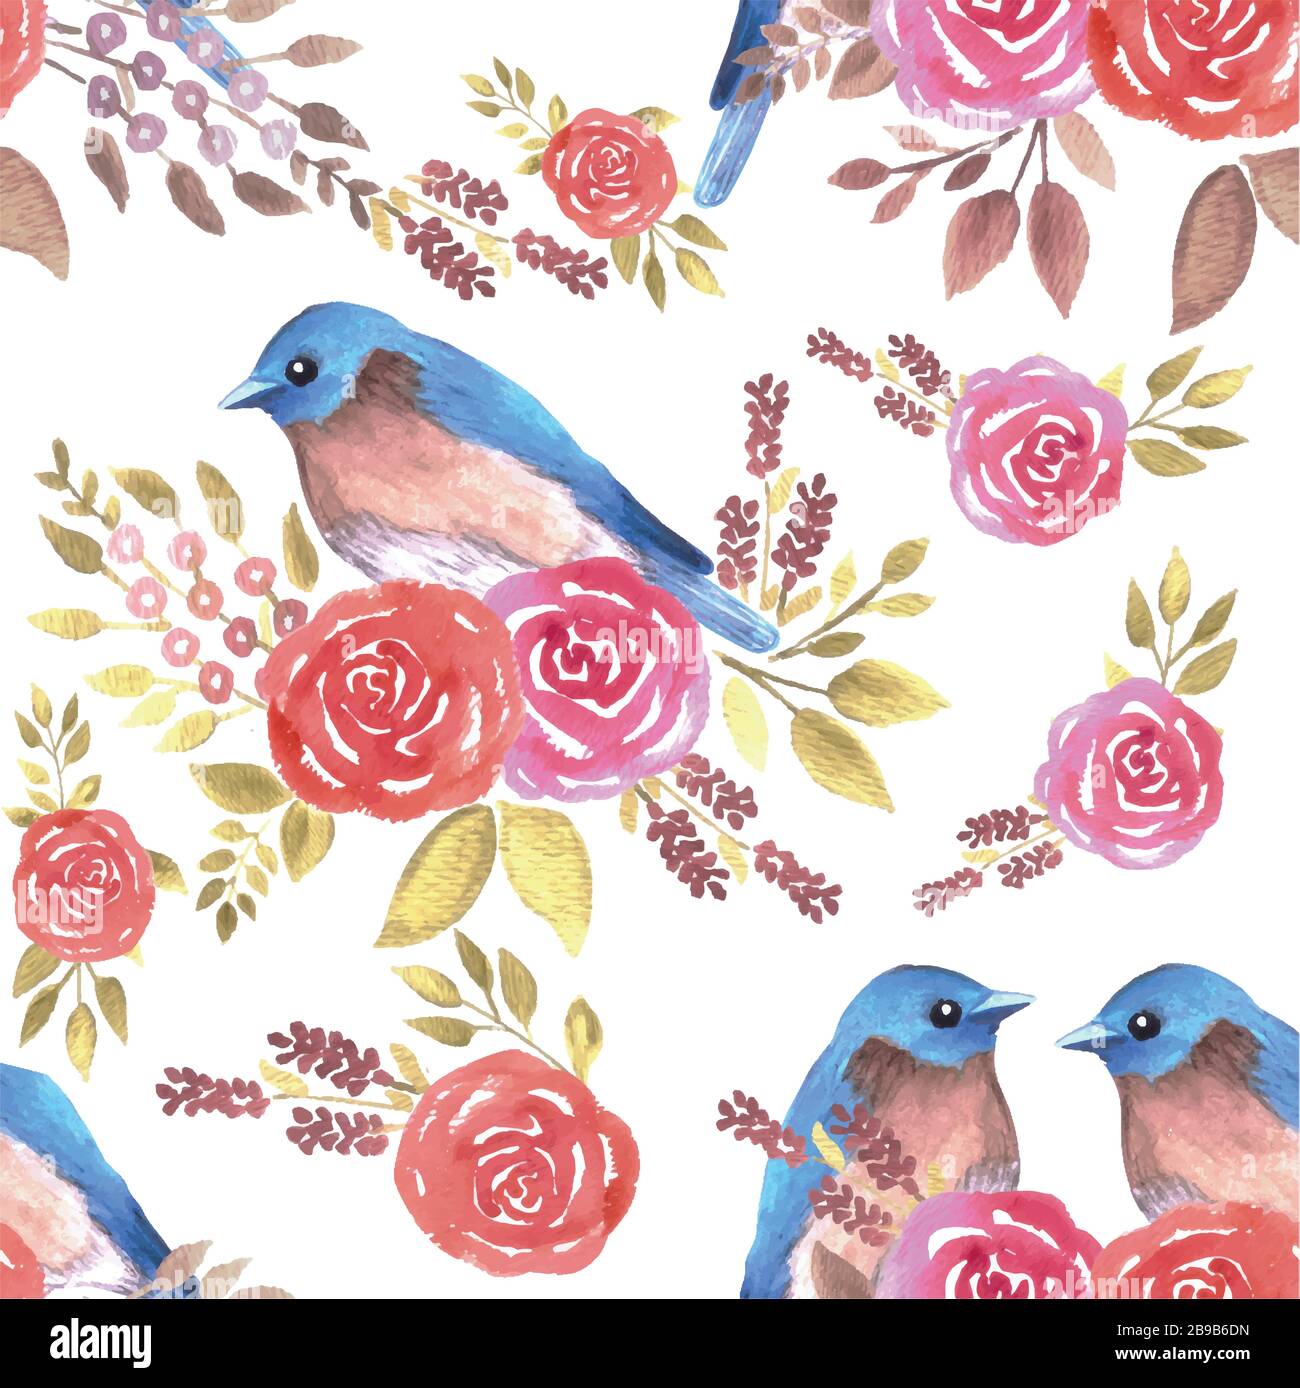 Eastern bluebird or Sialia sialis couple on seamless rose pattern watercolor background Stock Vector